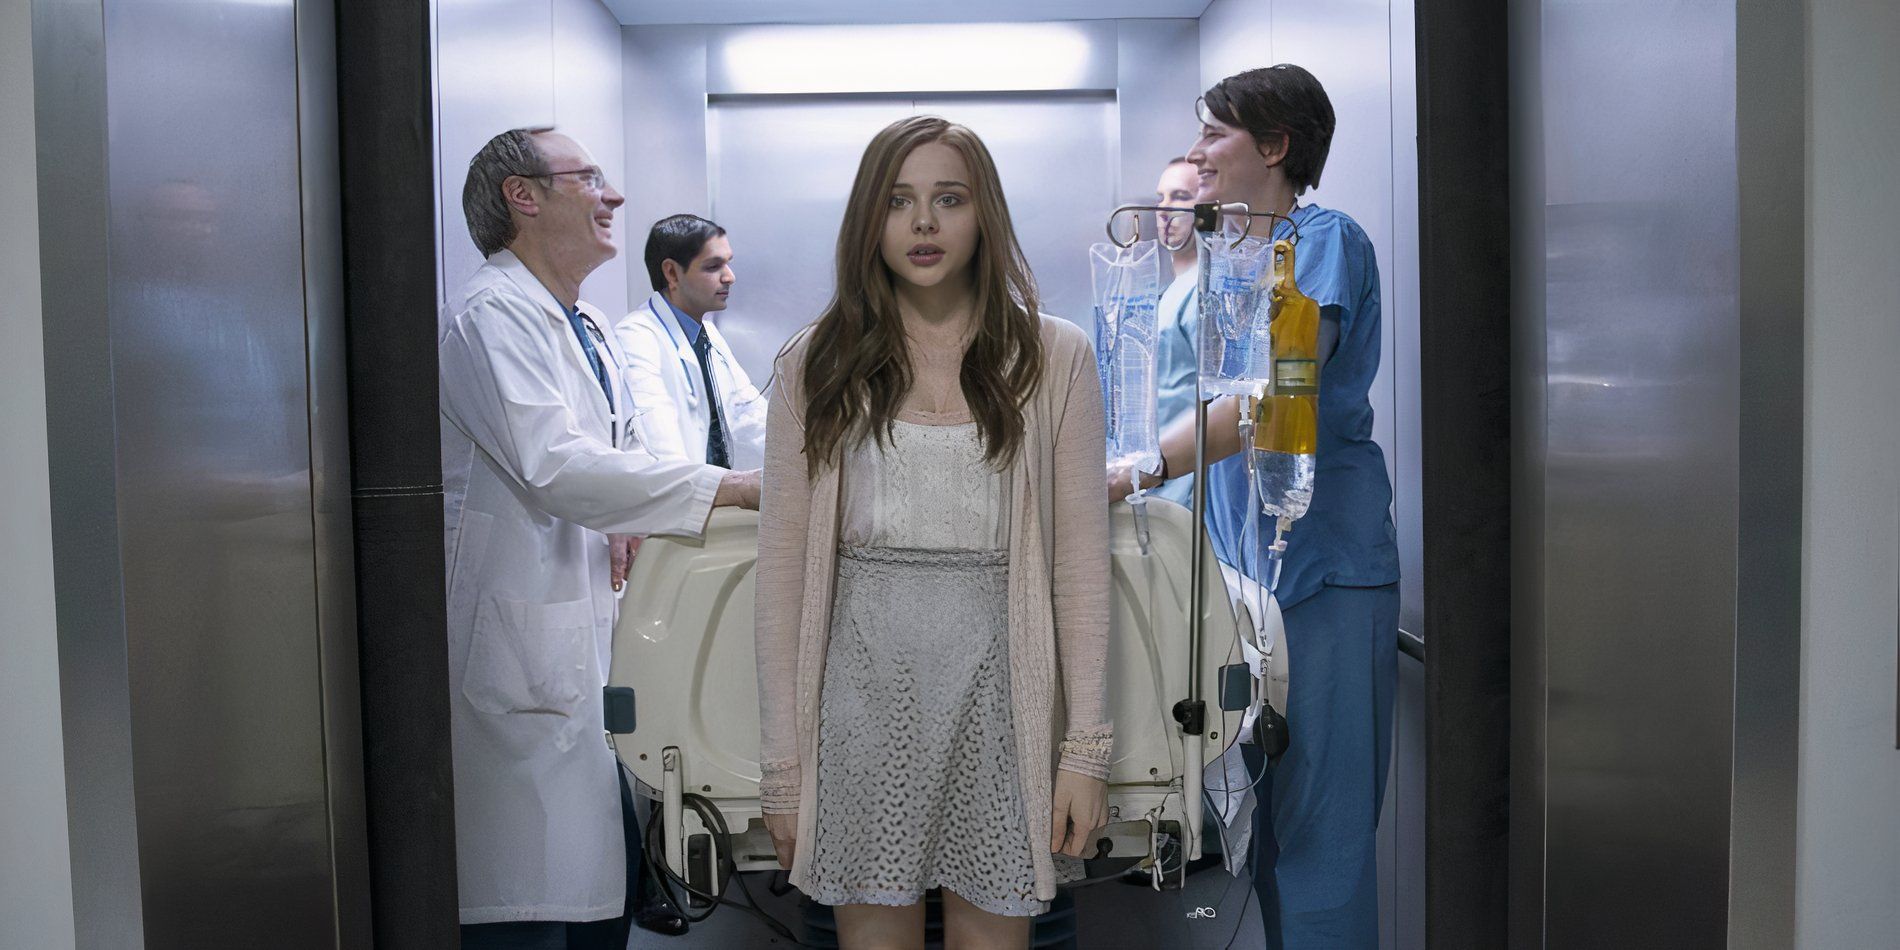 A young woman stands in front of doctors and nurses with a patient in an elevator in If I Stay